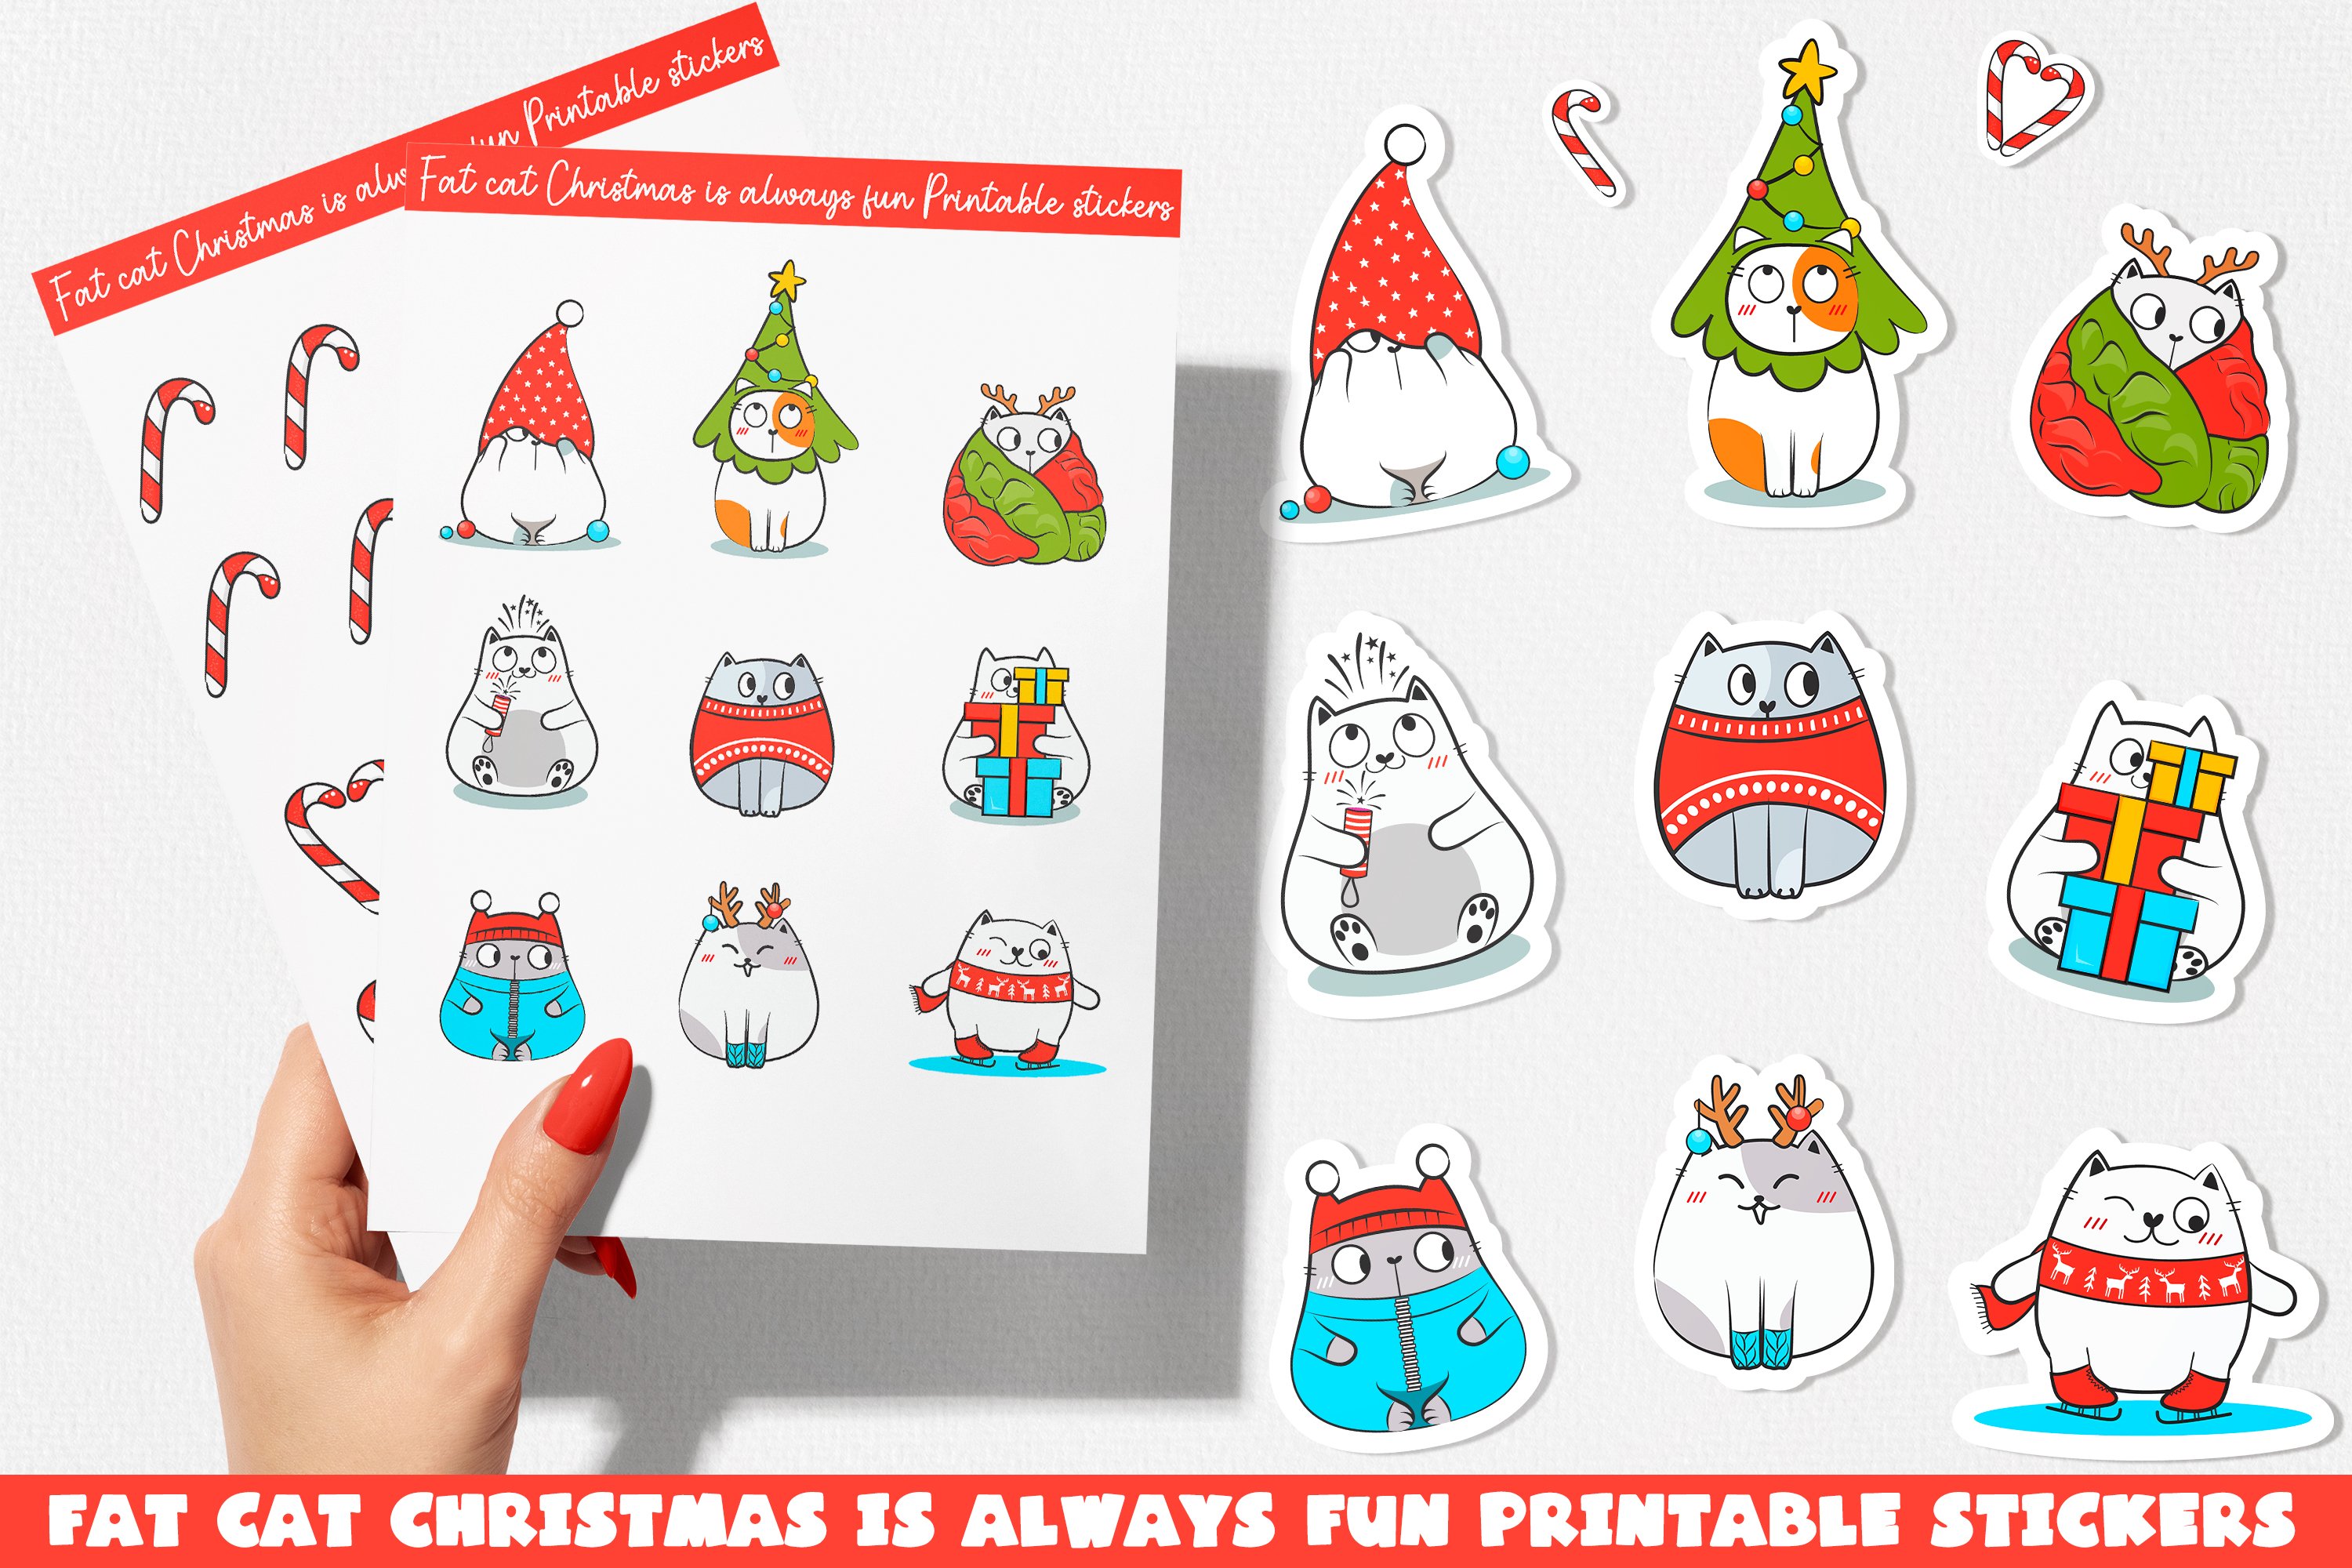 Image of bright stickers of cats on a Christmas theme.